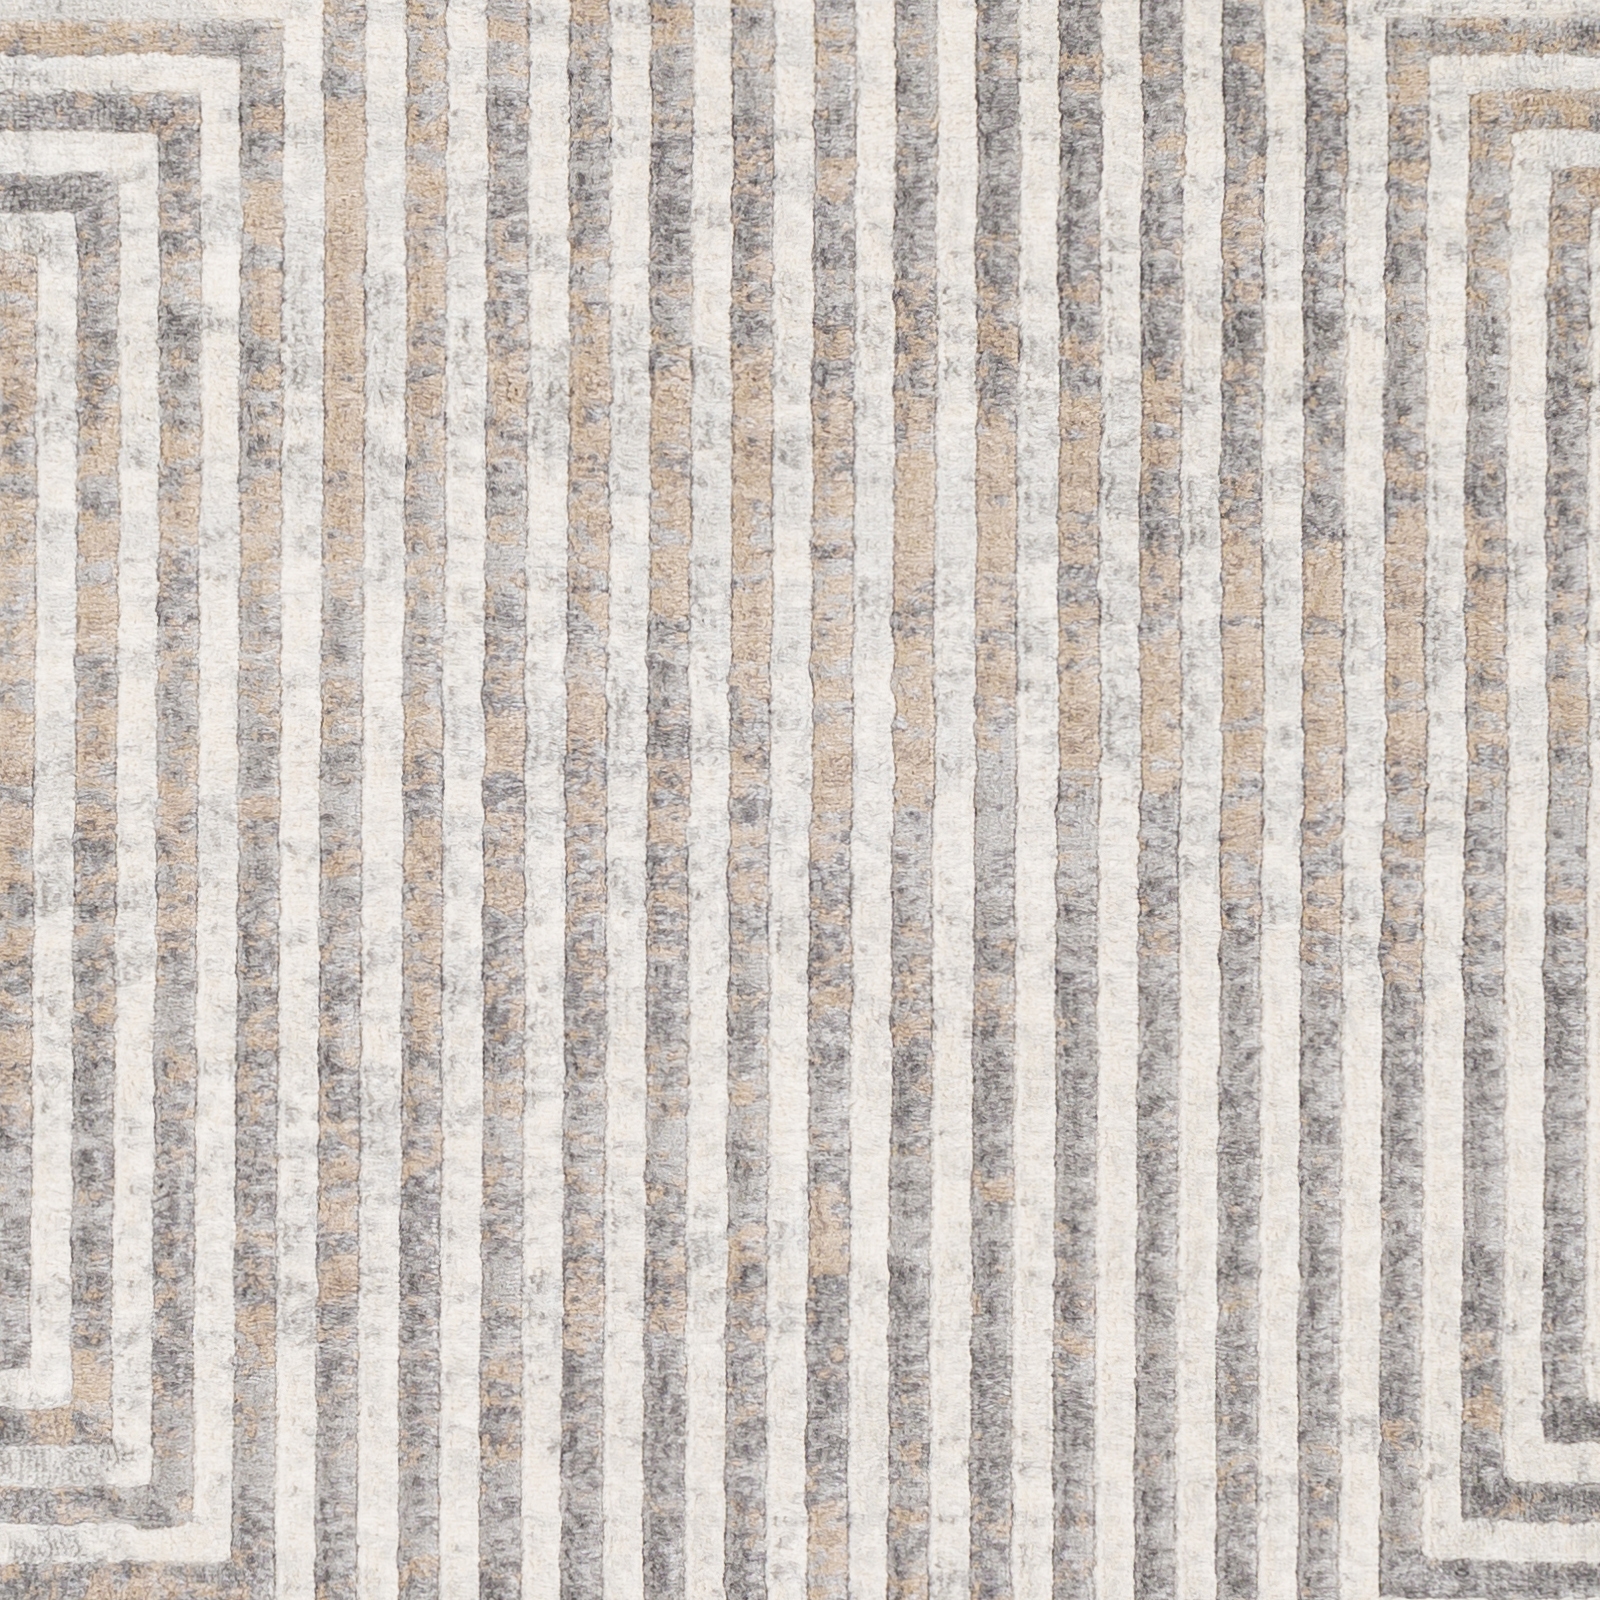 Remy Rug, 7'10" x 10' - Image 5